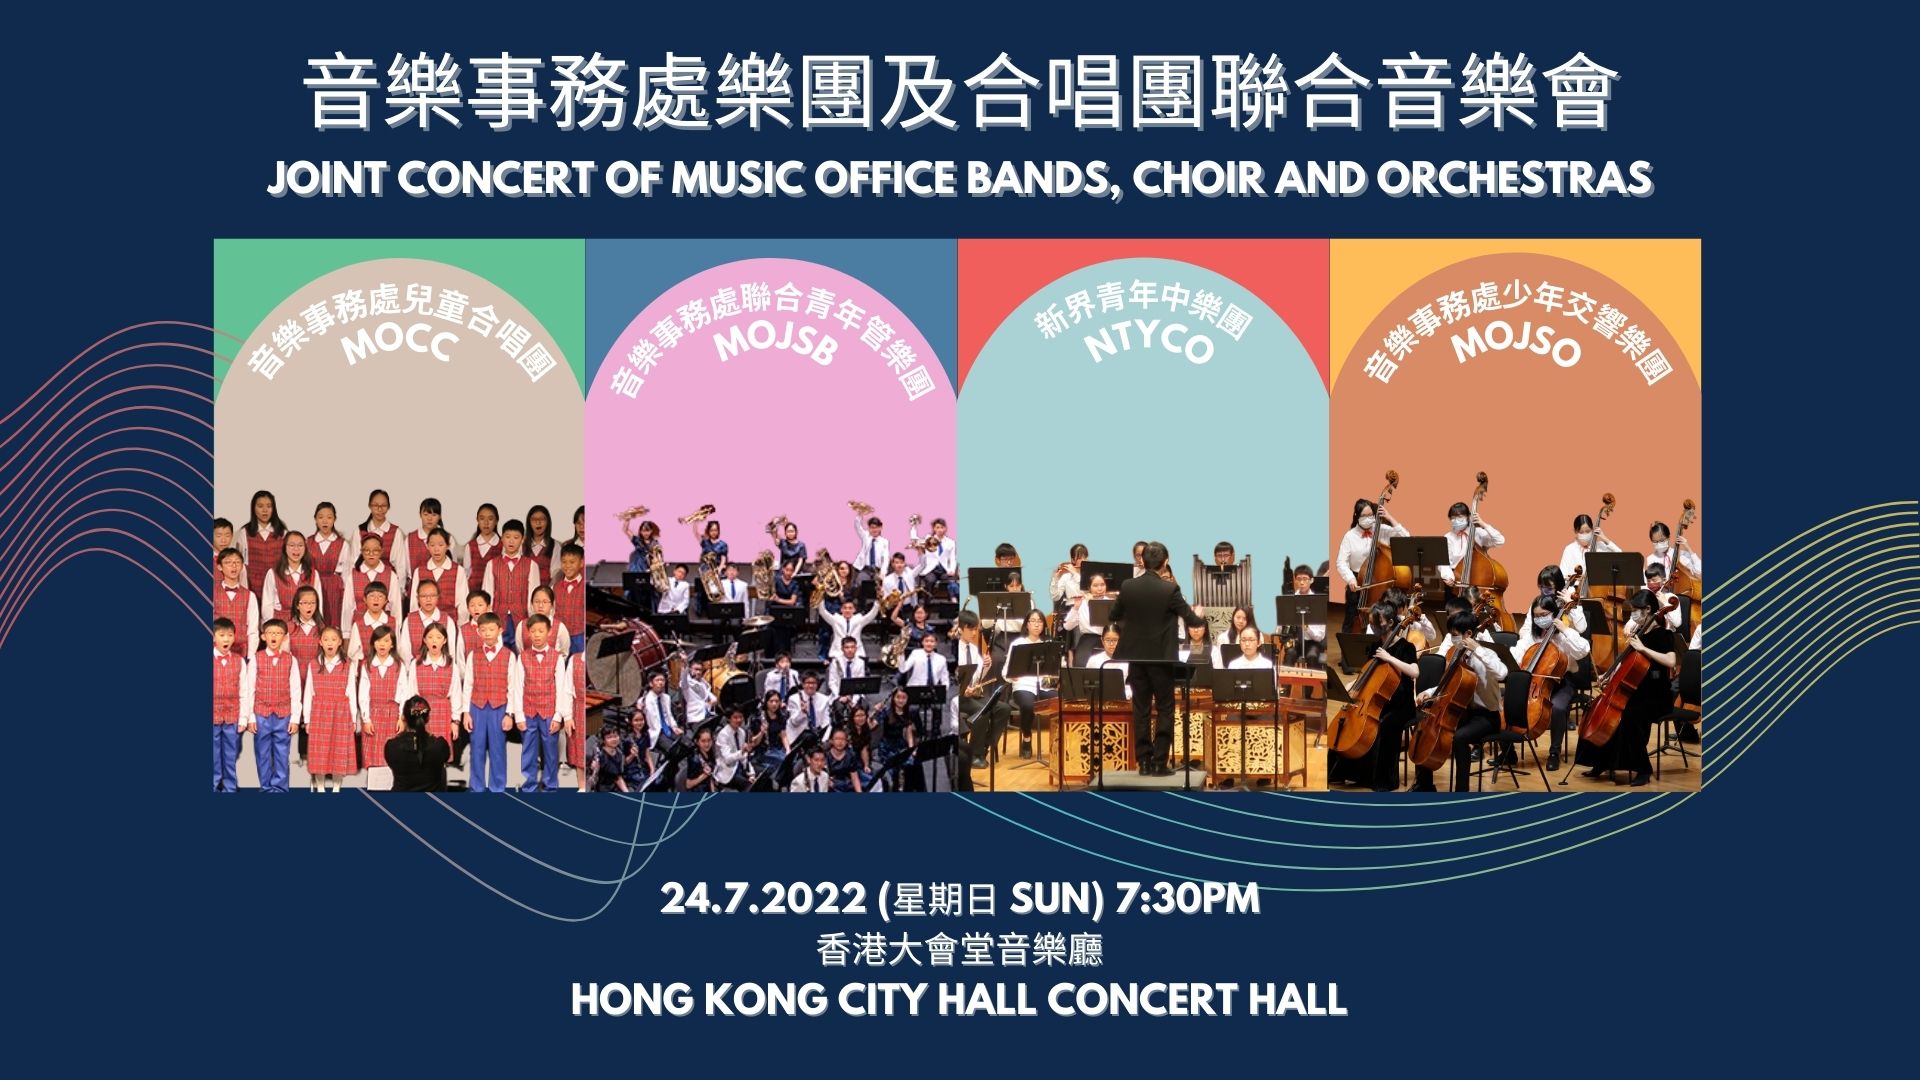 2022 Joint Concert of Music Office Bands, Choir and Orchestras (Completed)